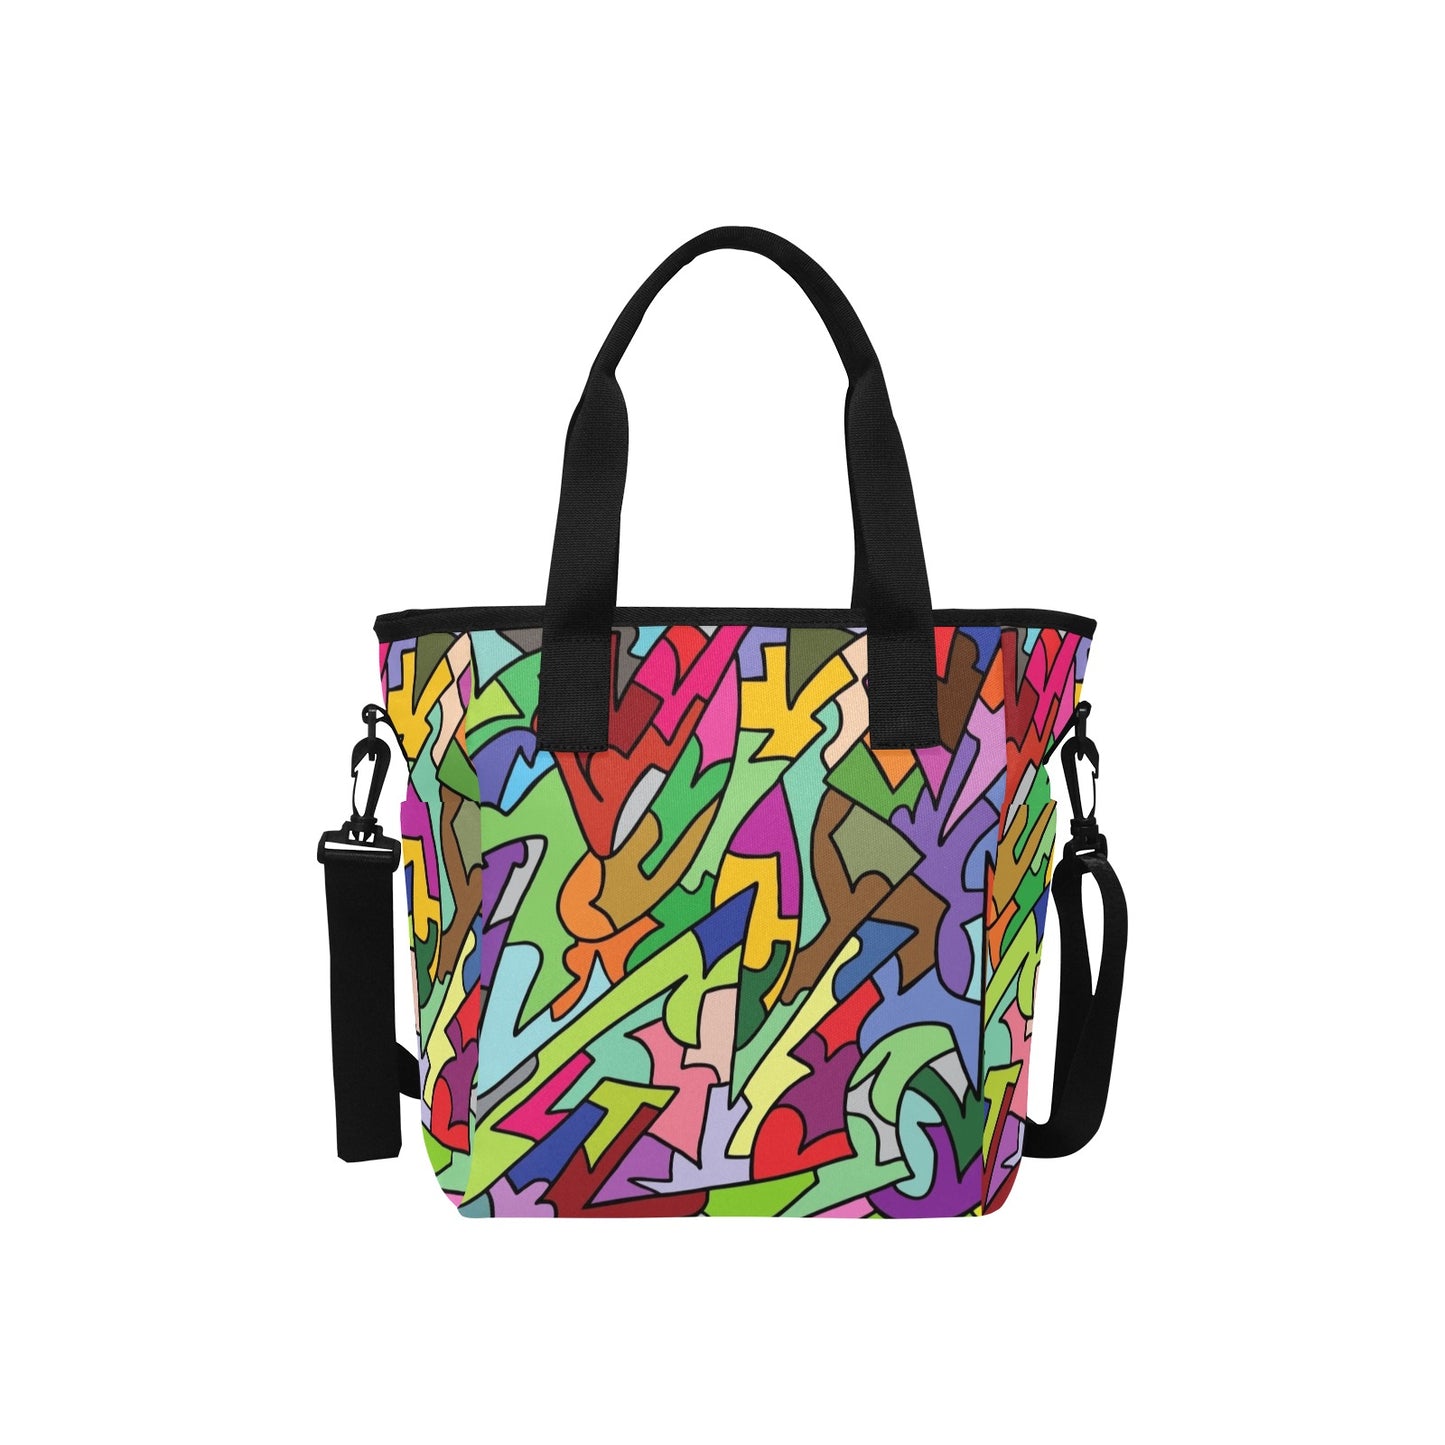 Bright Abstract - Tote Bag with Shoulder Strap Nylon Tote Bag